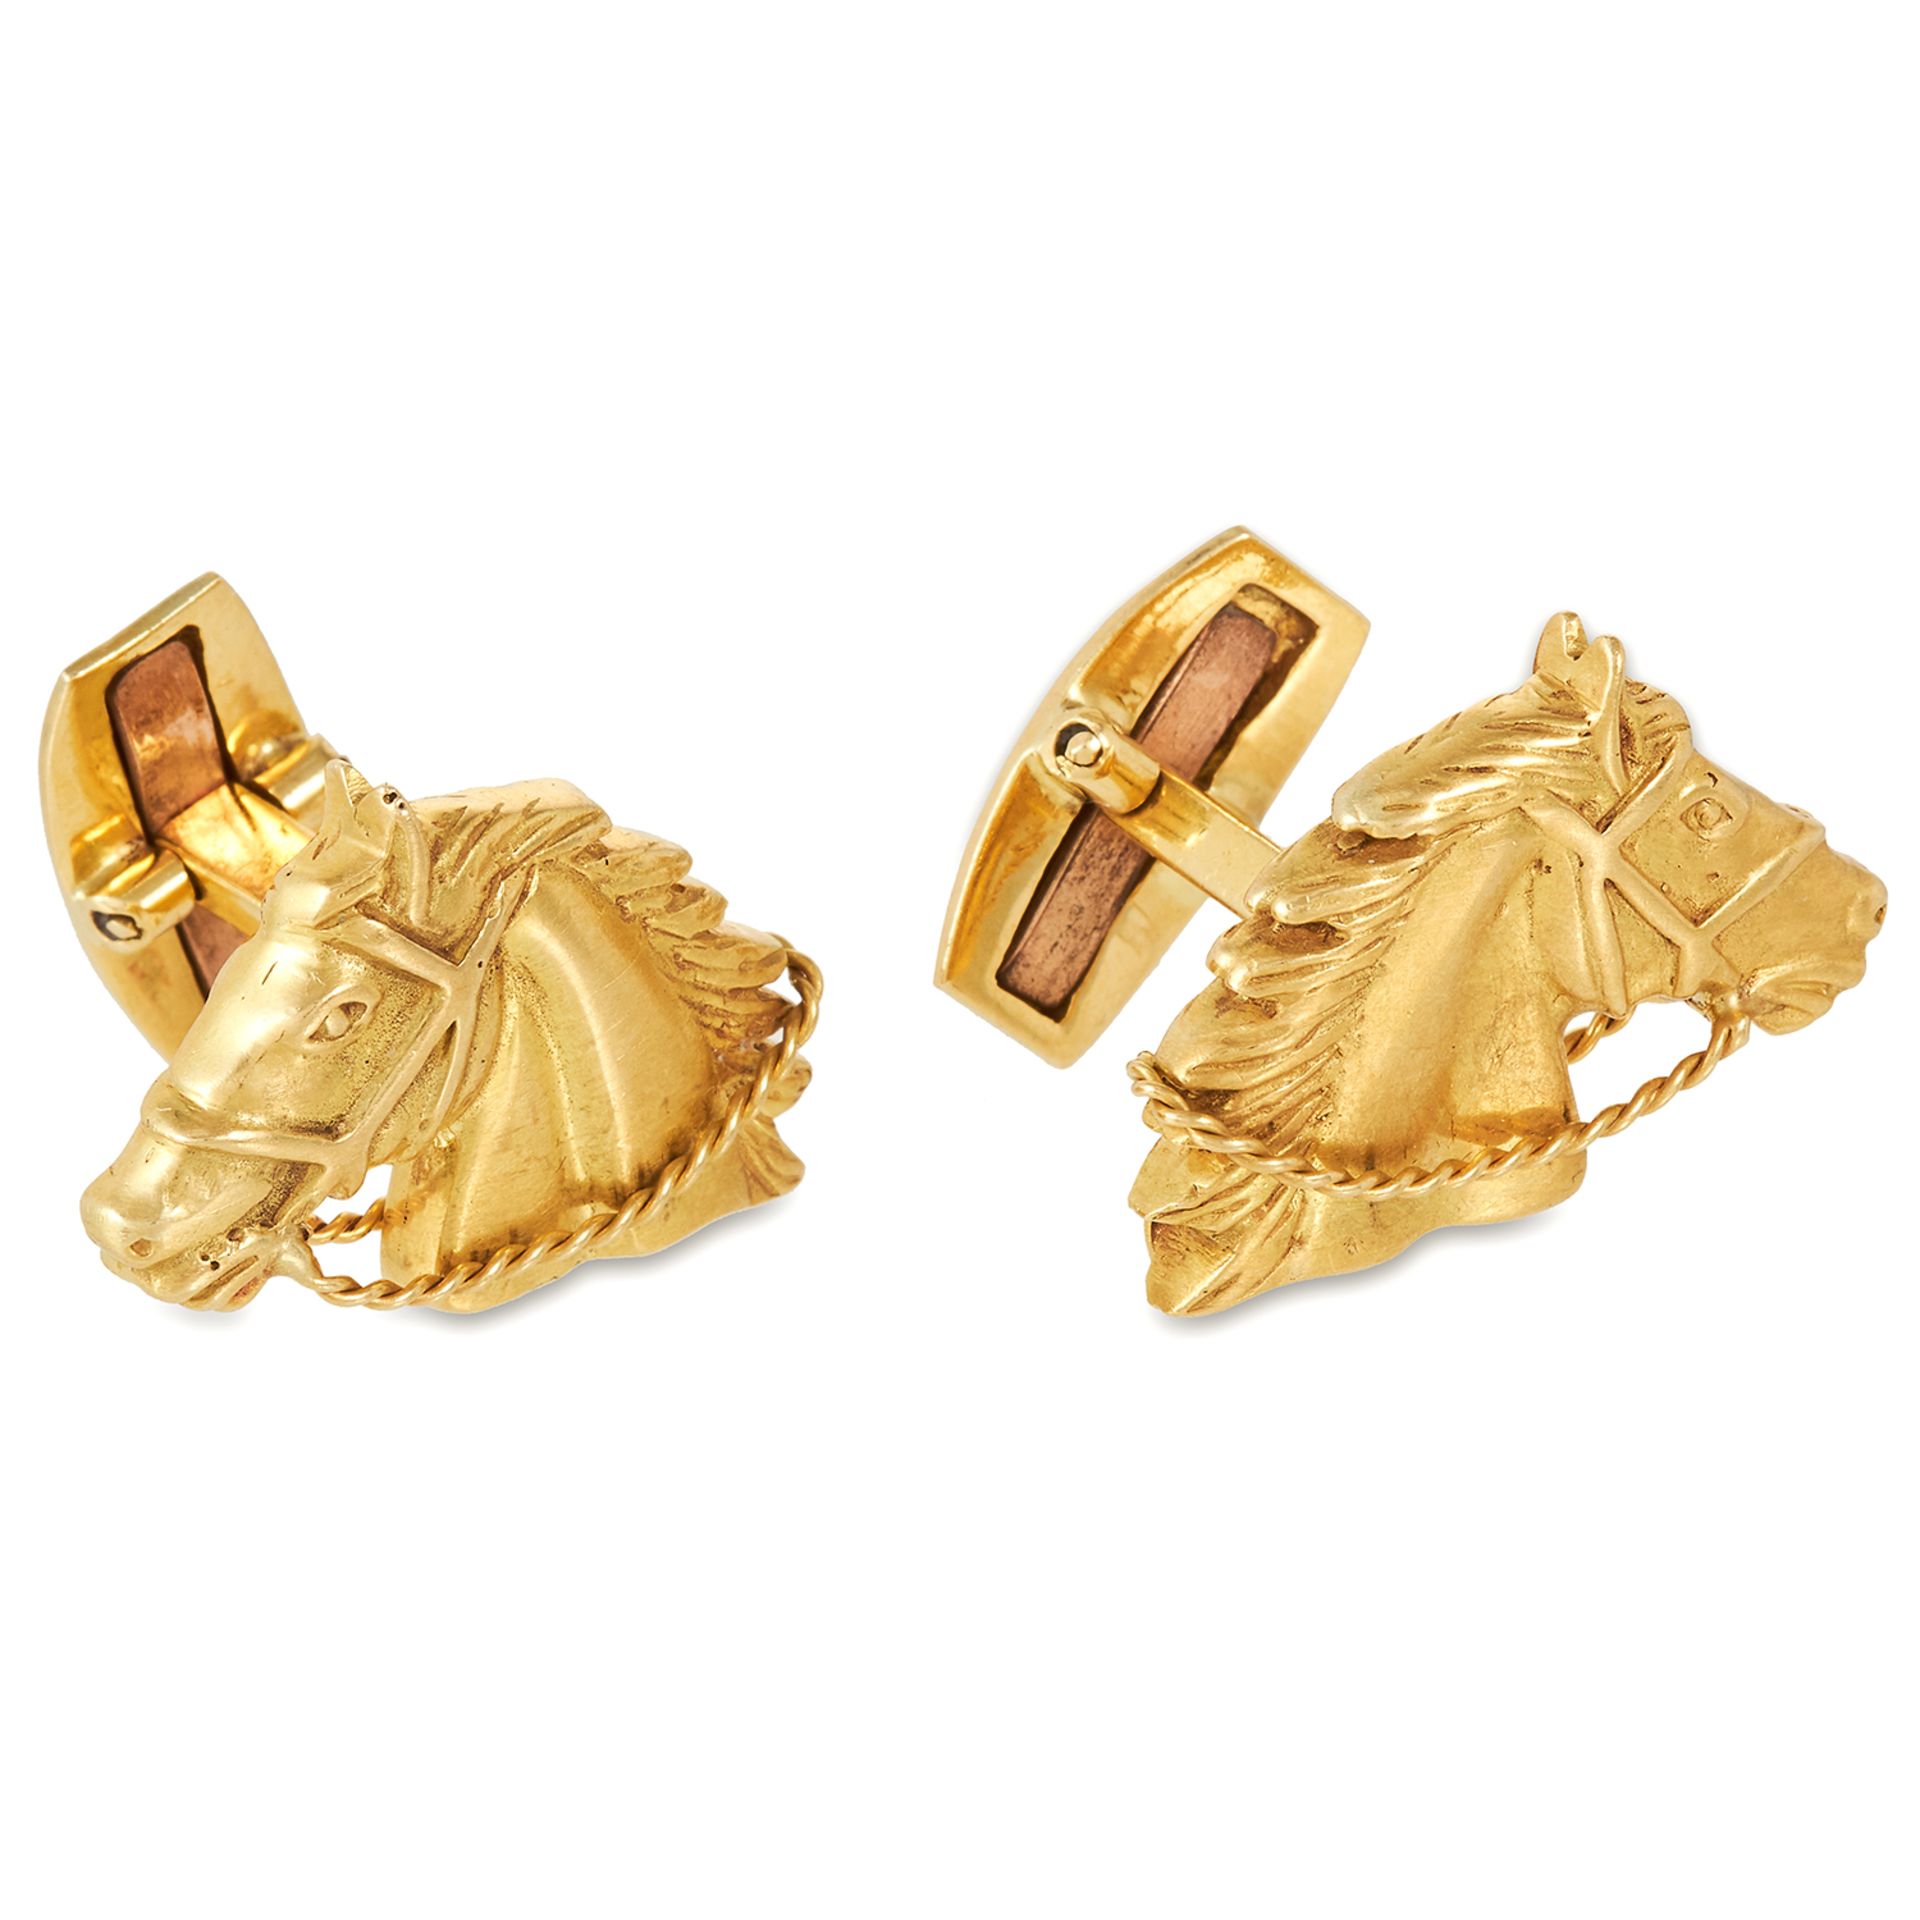 A PAIR OF HORSE CUFFLINKS in 18ct yellow gold, depicting horses heads, marked indistinctly, 22.5g.